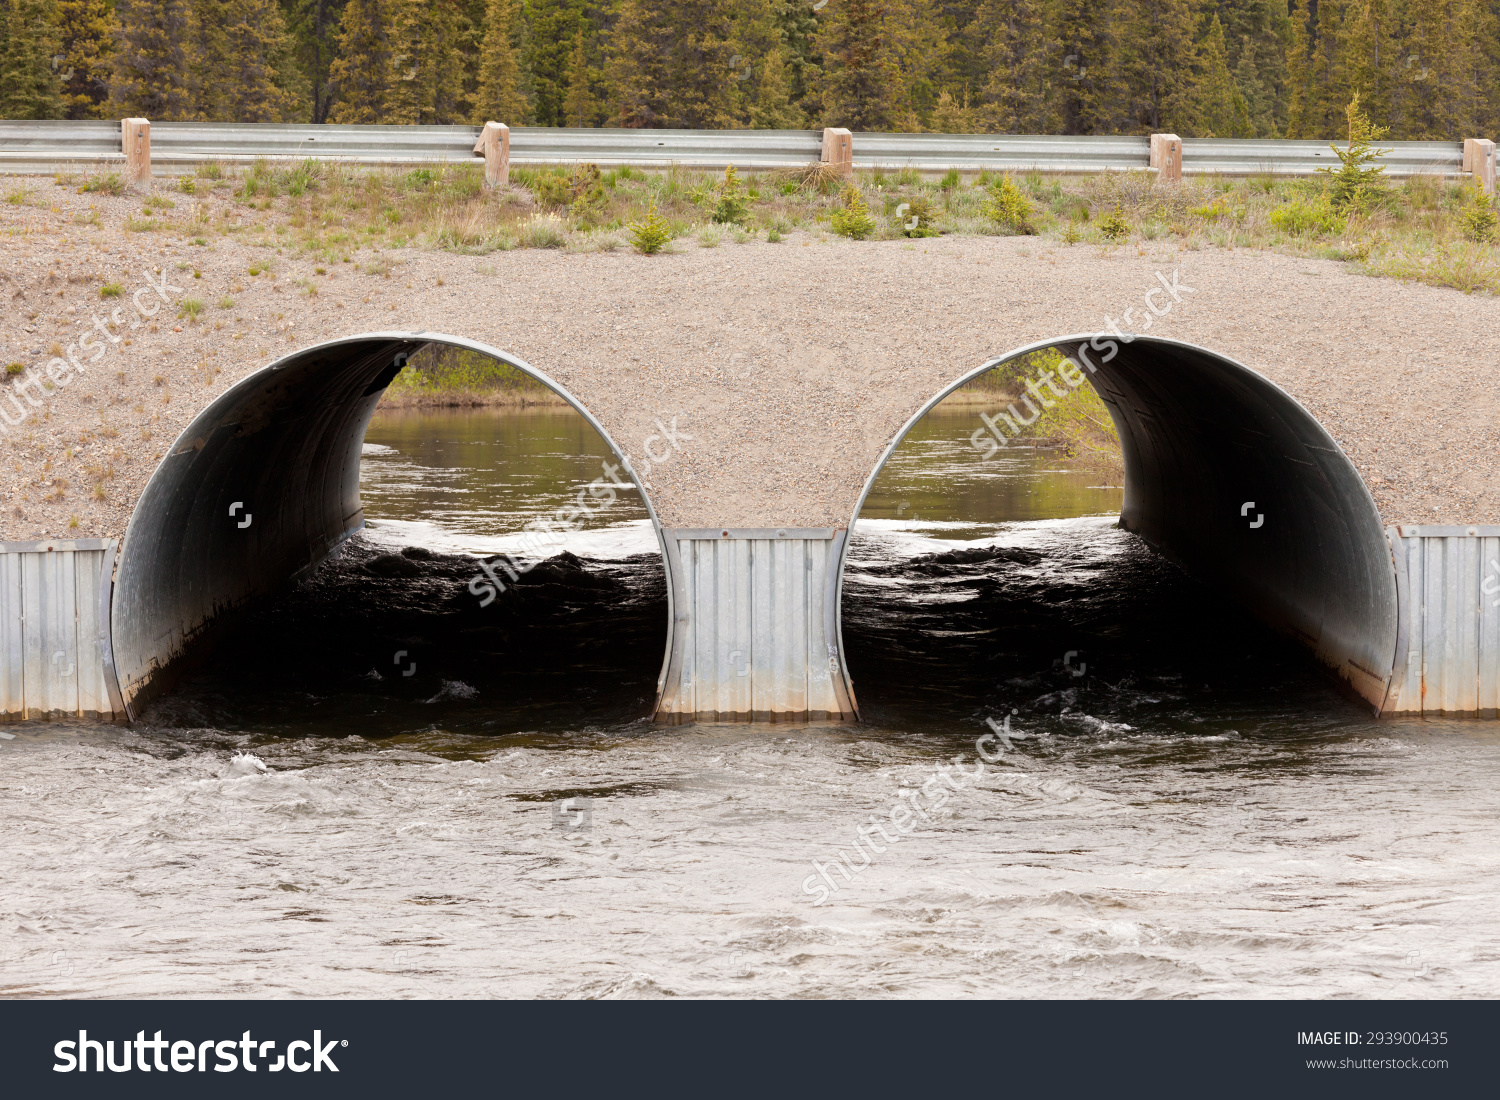 Road Over Dual Culvert Pipe Infrastructure Stock Photo 293900435.